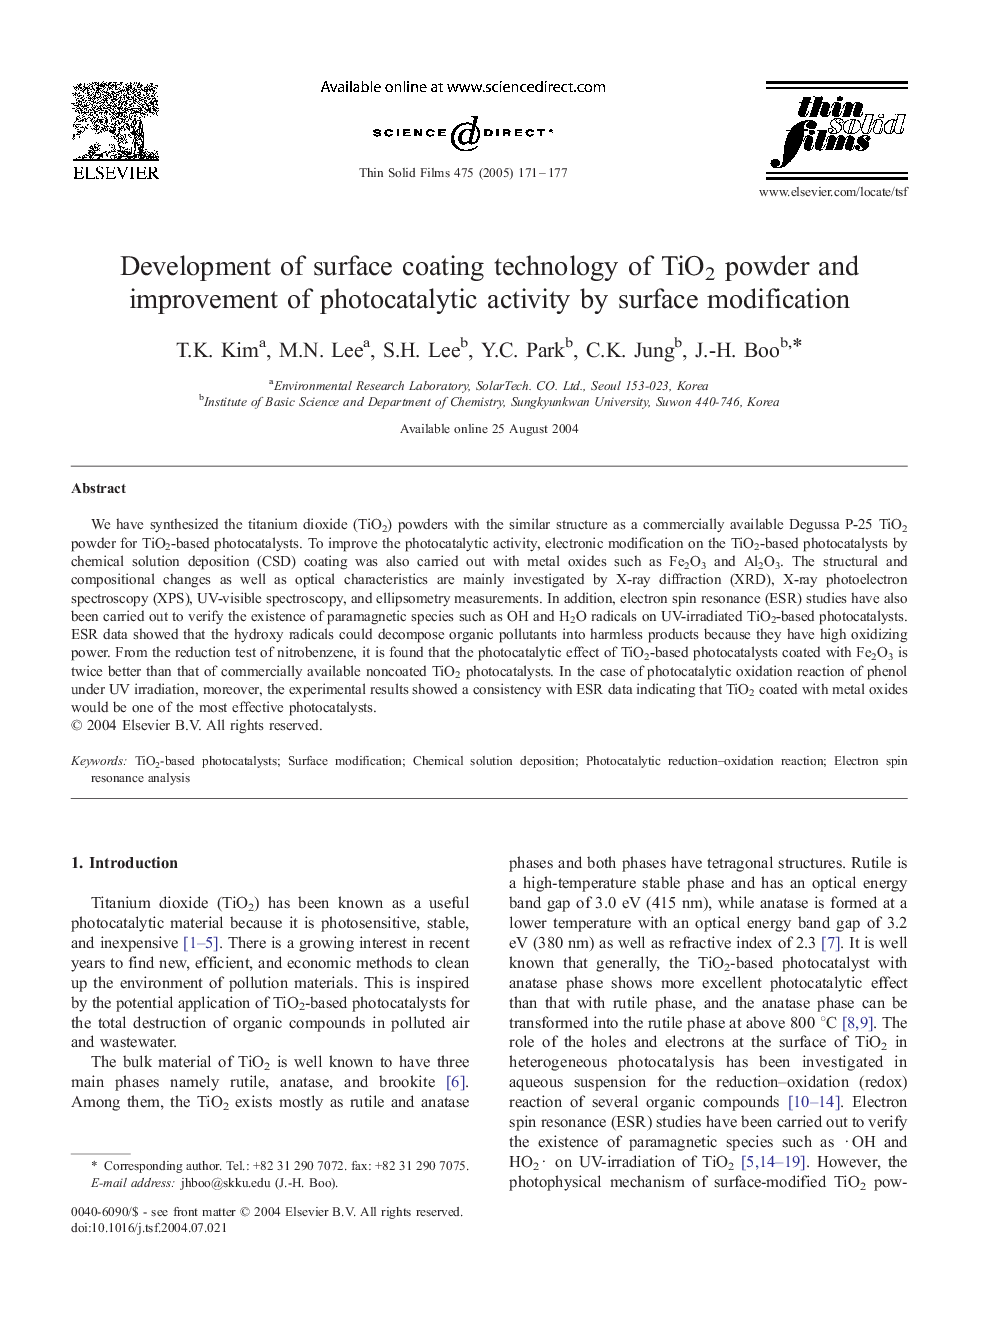 Development of surface coating technology of TiO2 powder and improvement of photocatalytic activity by surface modification